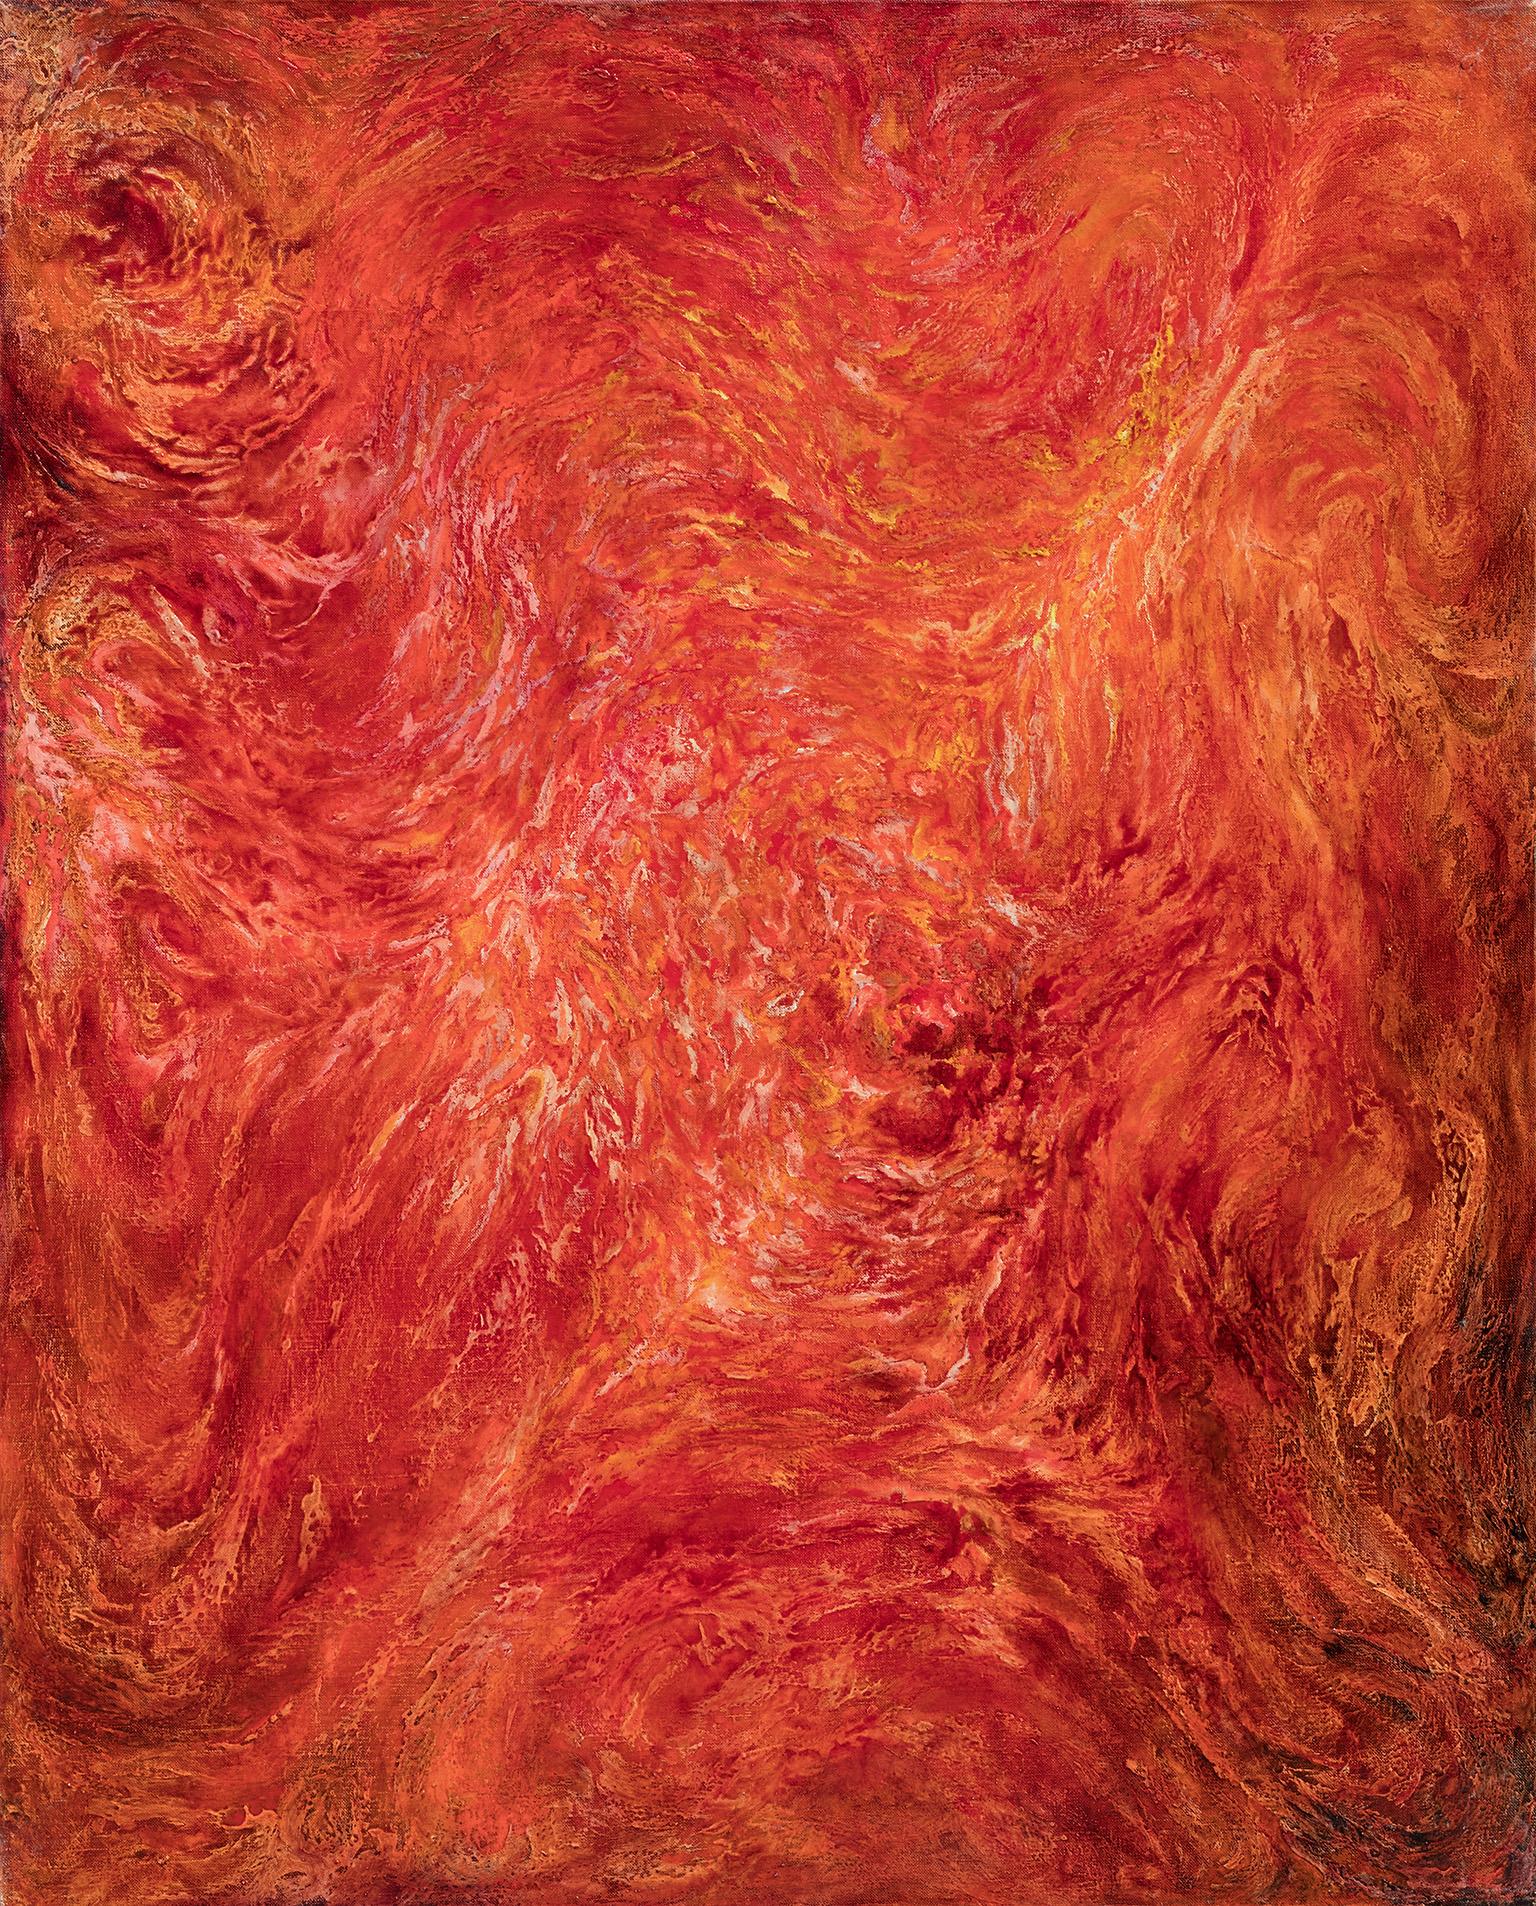 Ruggero Vanni Abstract Painting - Summer Swirls - Red and Orange Abstract Gestural Oil Painting